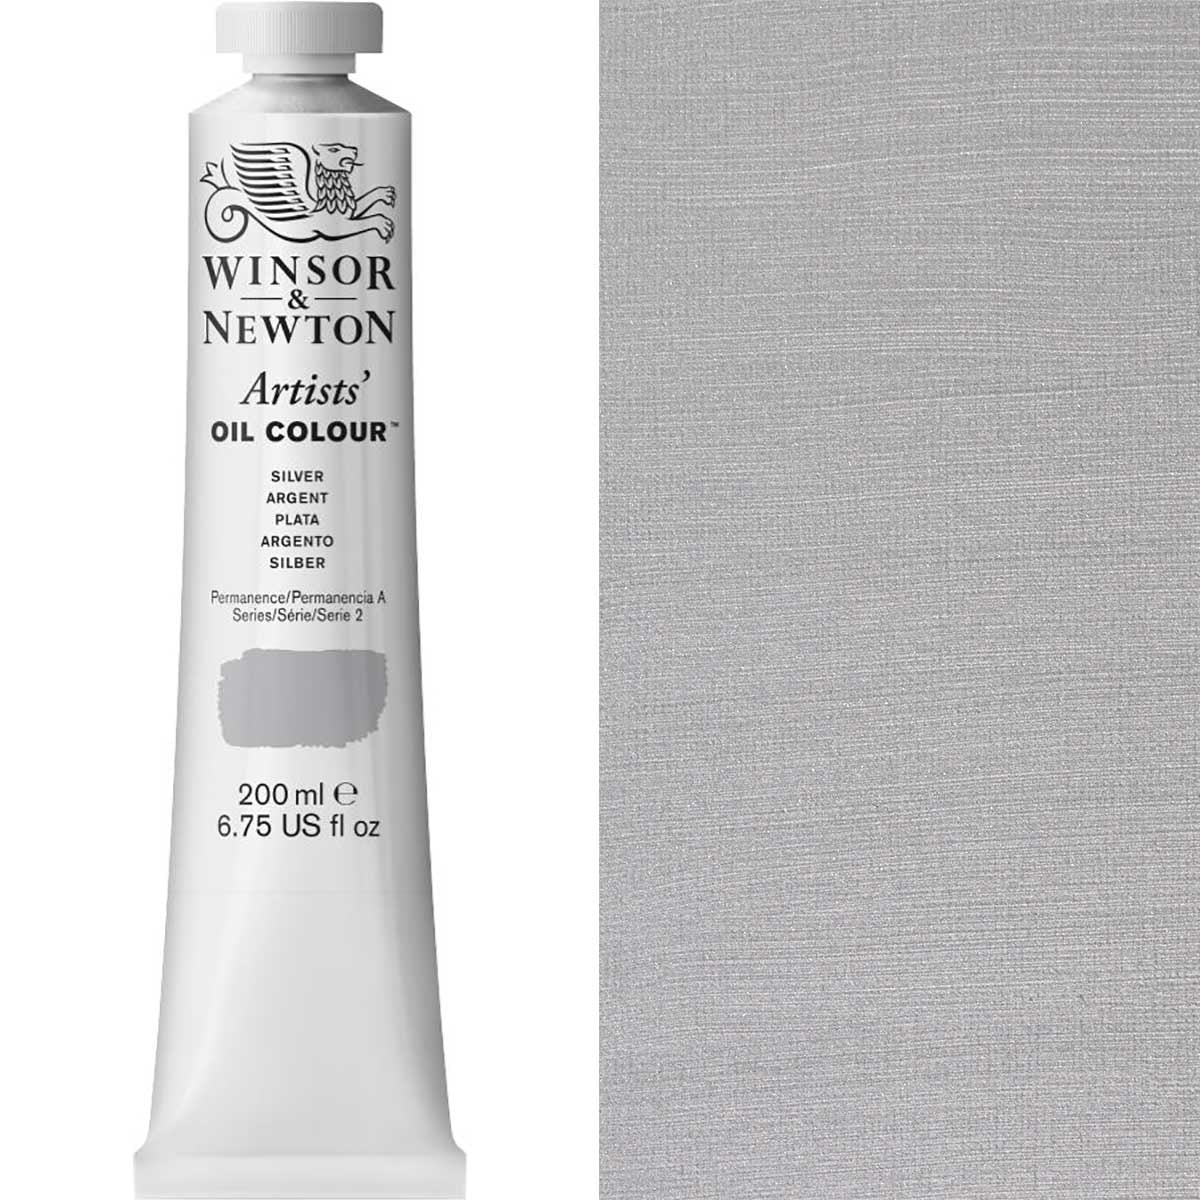 Winsor and Newton - Artists' Oil Colour - 200ml - Silver